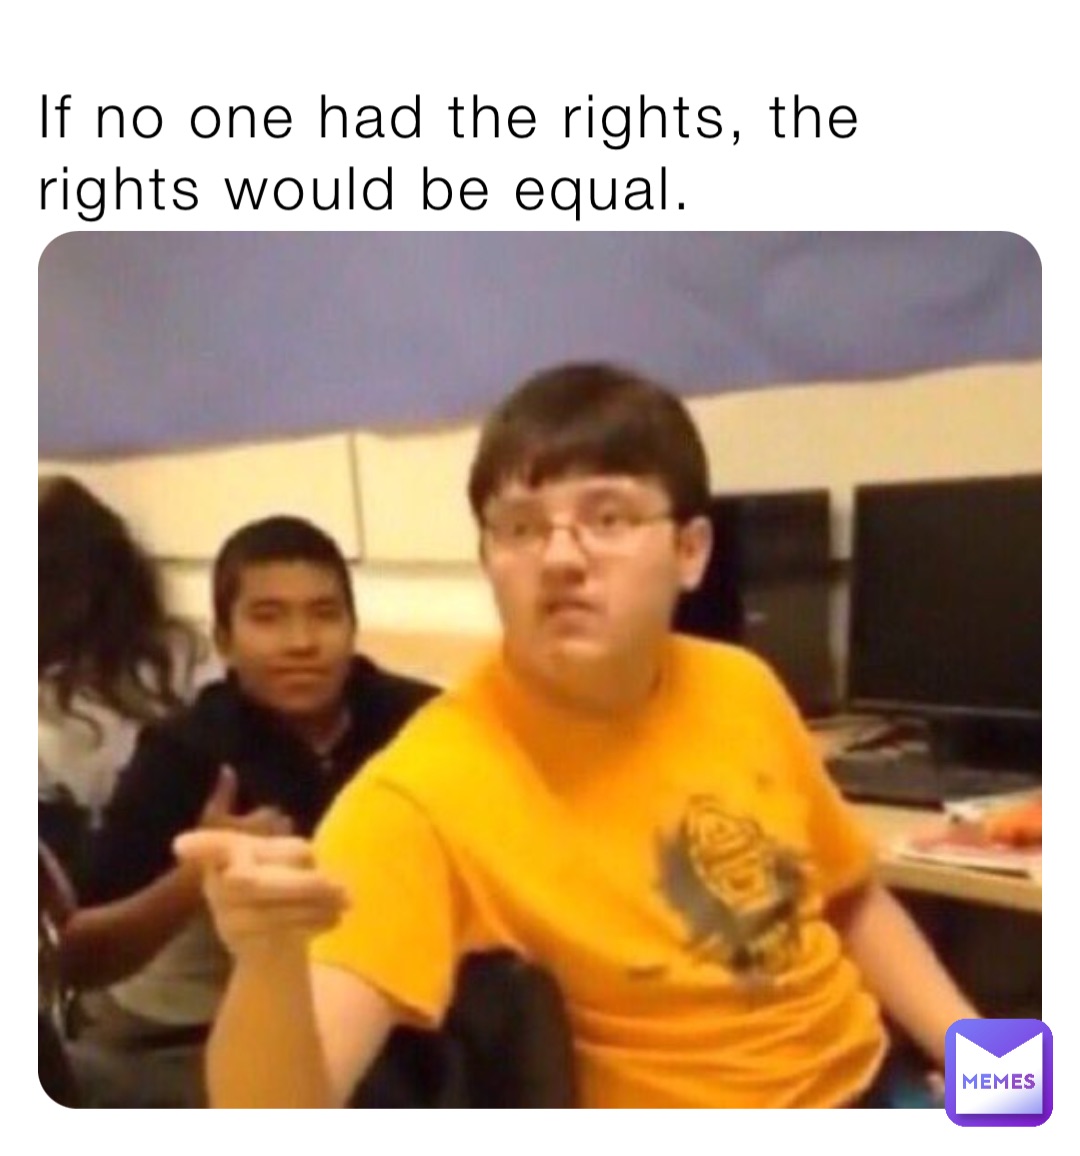 If no one had the rights, the rights would be equal.